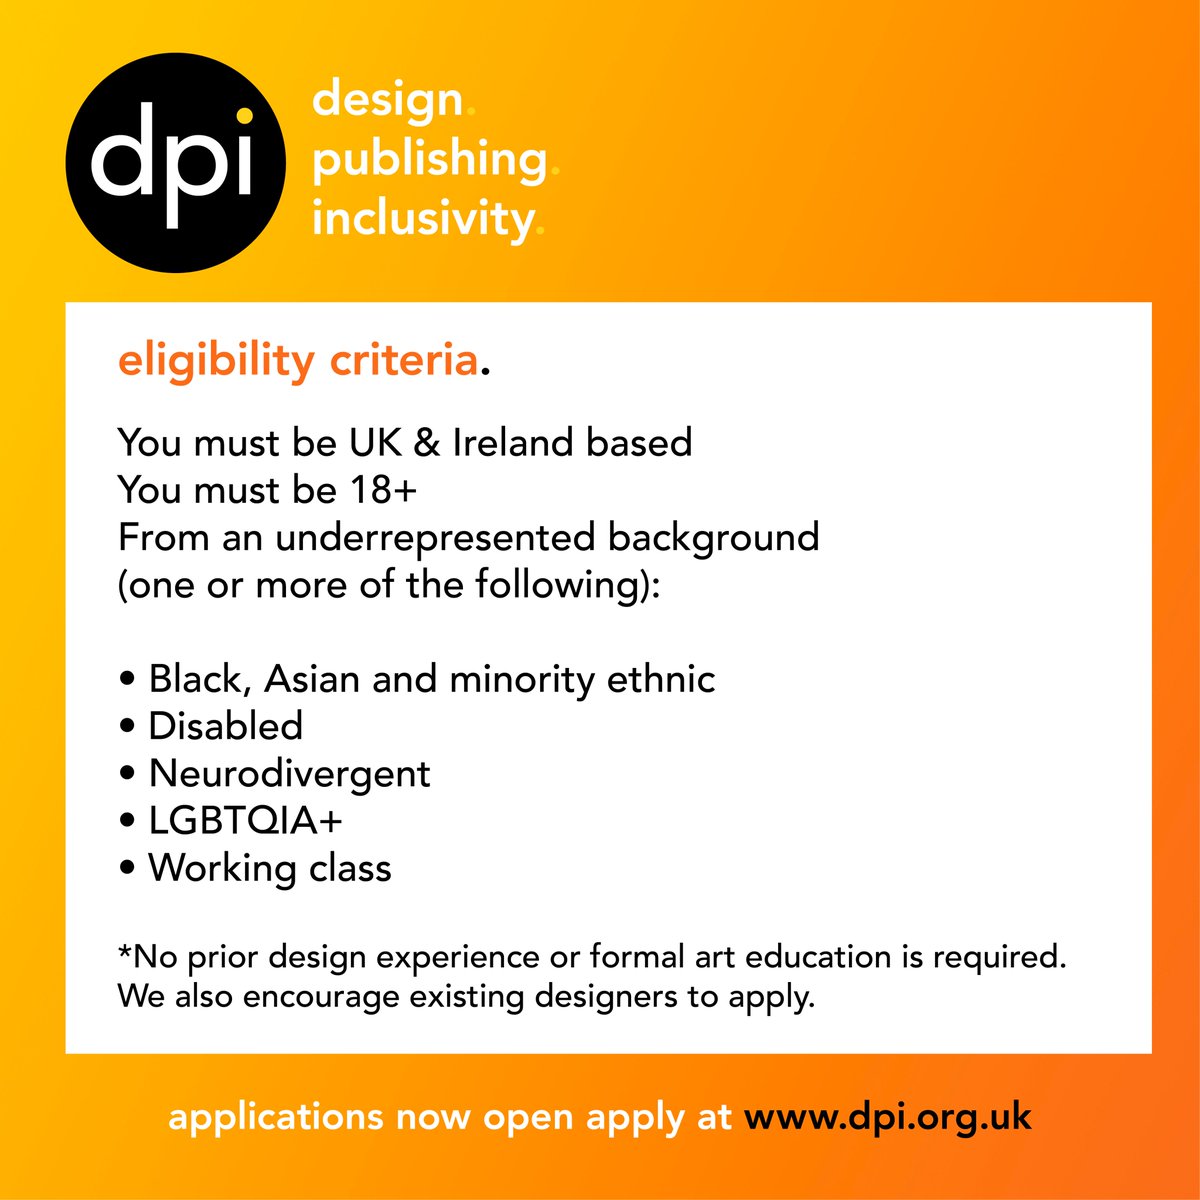 🌟DPI explained🌟 - Our Mission, Mentoring Process and Eligibility Criteria - check out dpi.org.uk for more information and to apply